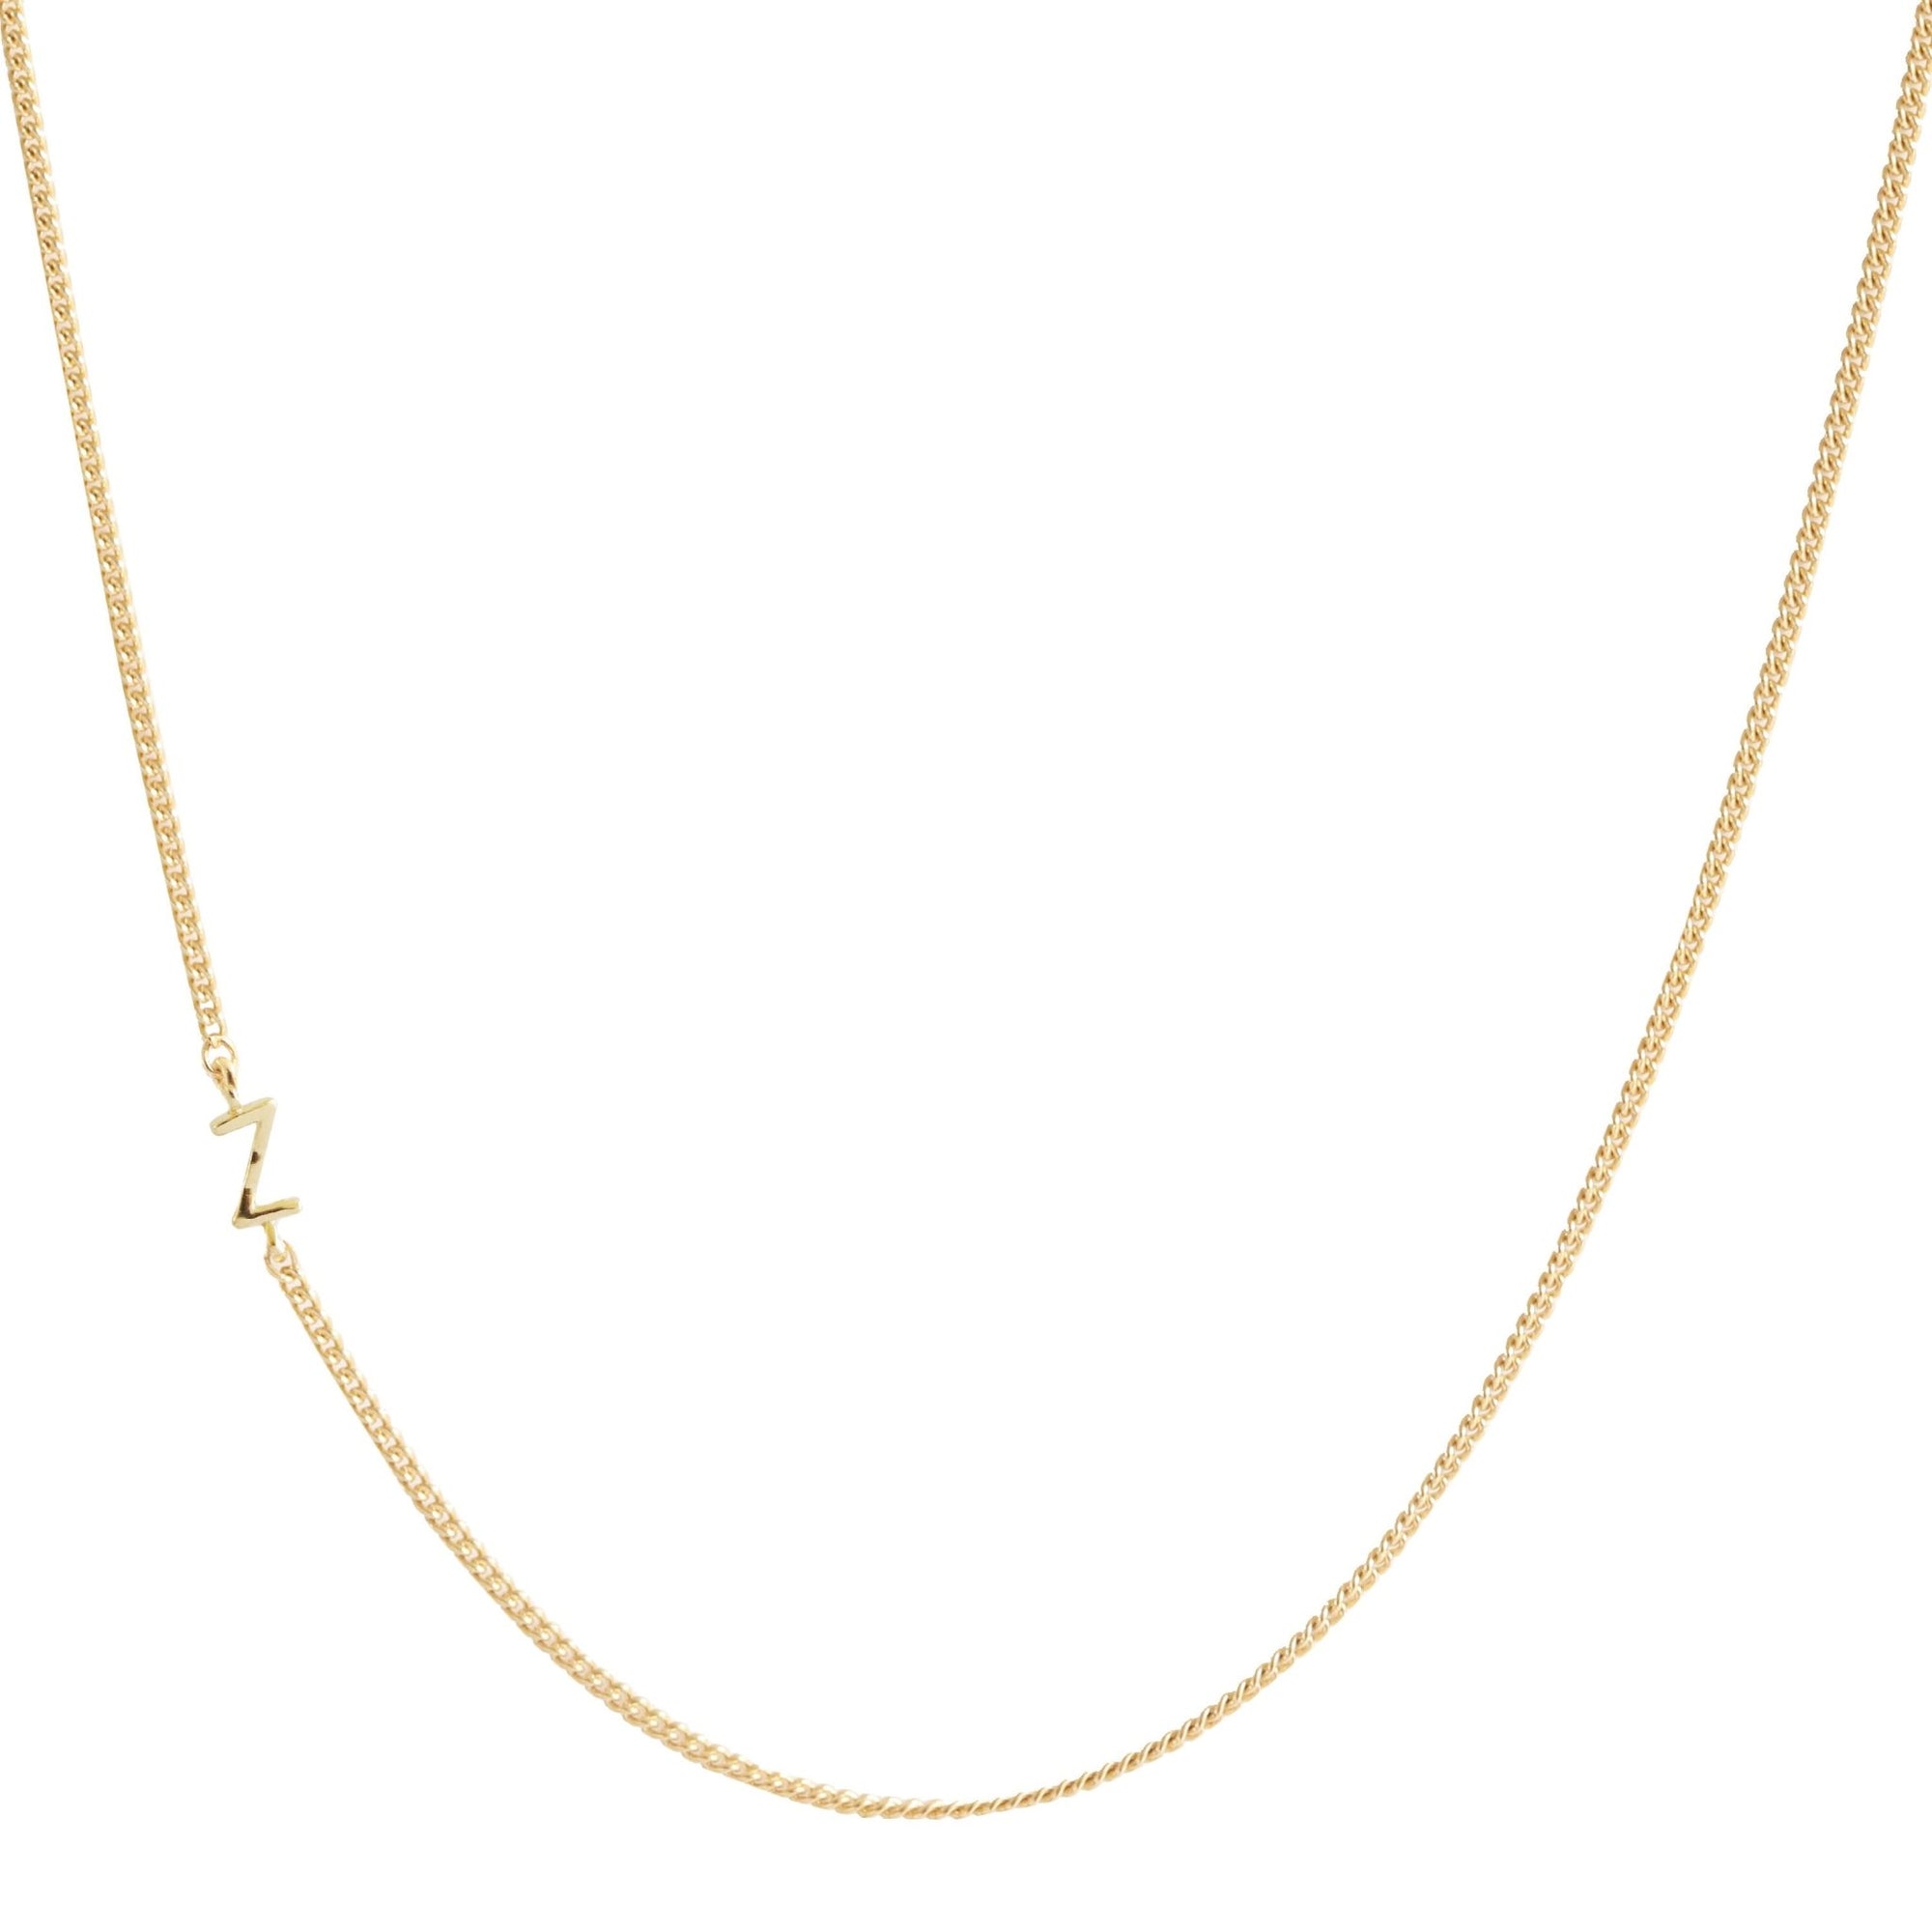 NOTABLE OFFSET INITIAL NECKLACE - Z - GOLD - SO PRETTY CARA COTTER